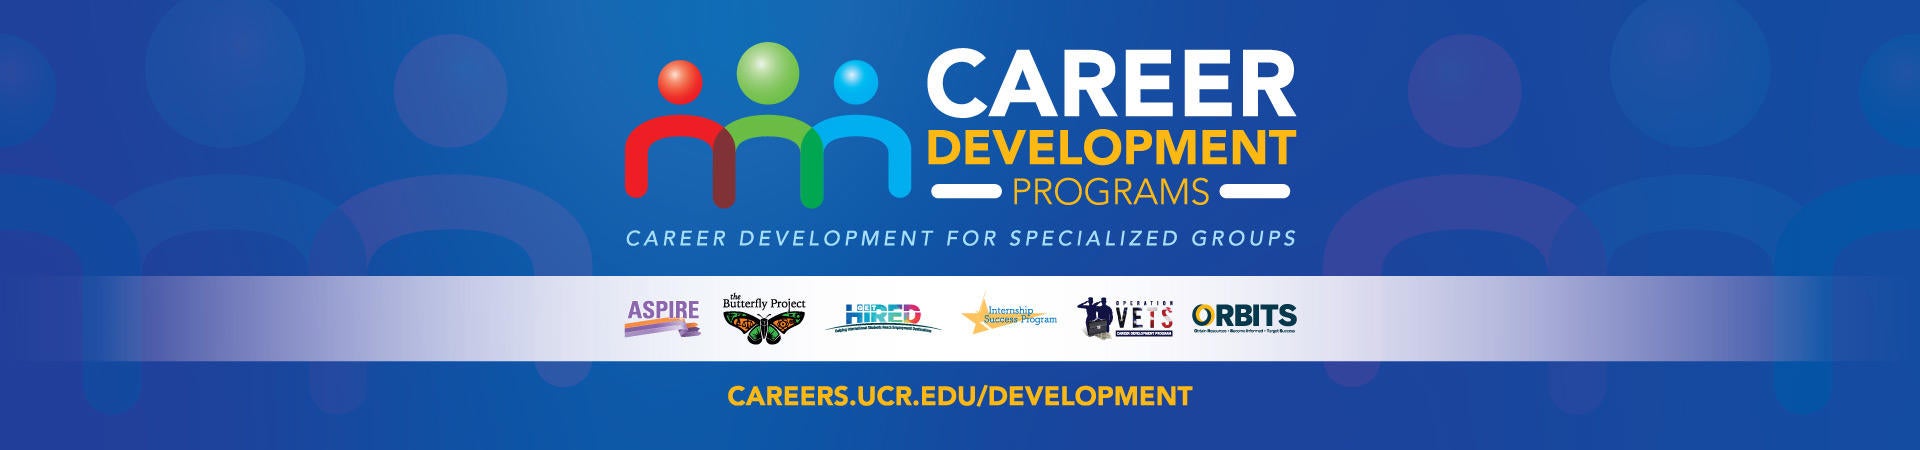 Career Development Programs: Career Development for Specialized Groups. Programs include ASPIRE, The Butterfly Project, Get Hired, Internship Success Program, Operation Vets, and ORBITS.